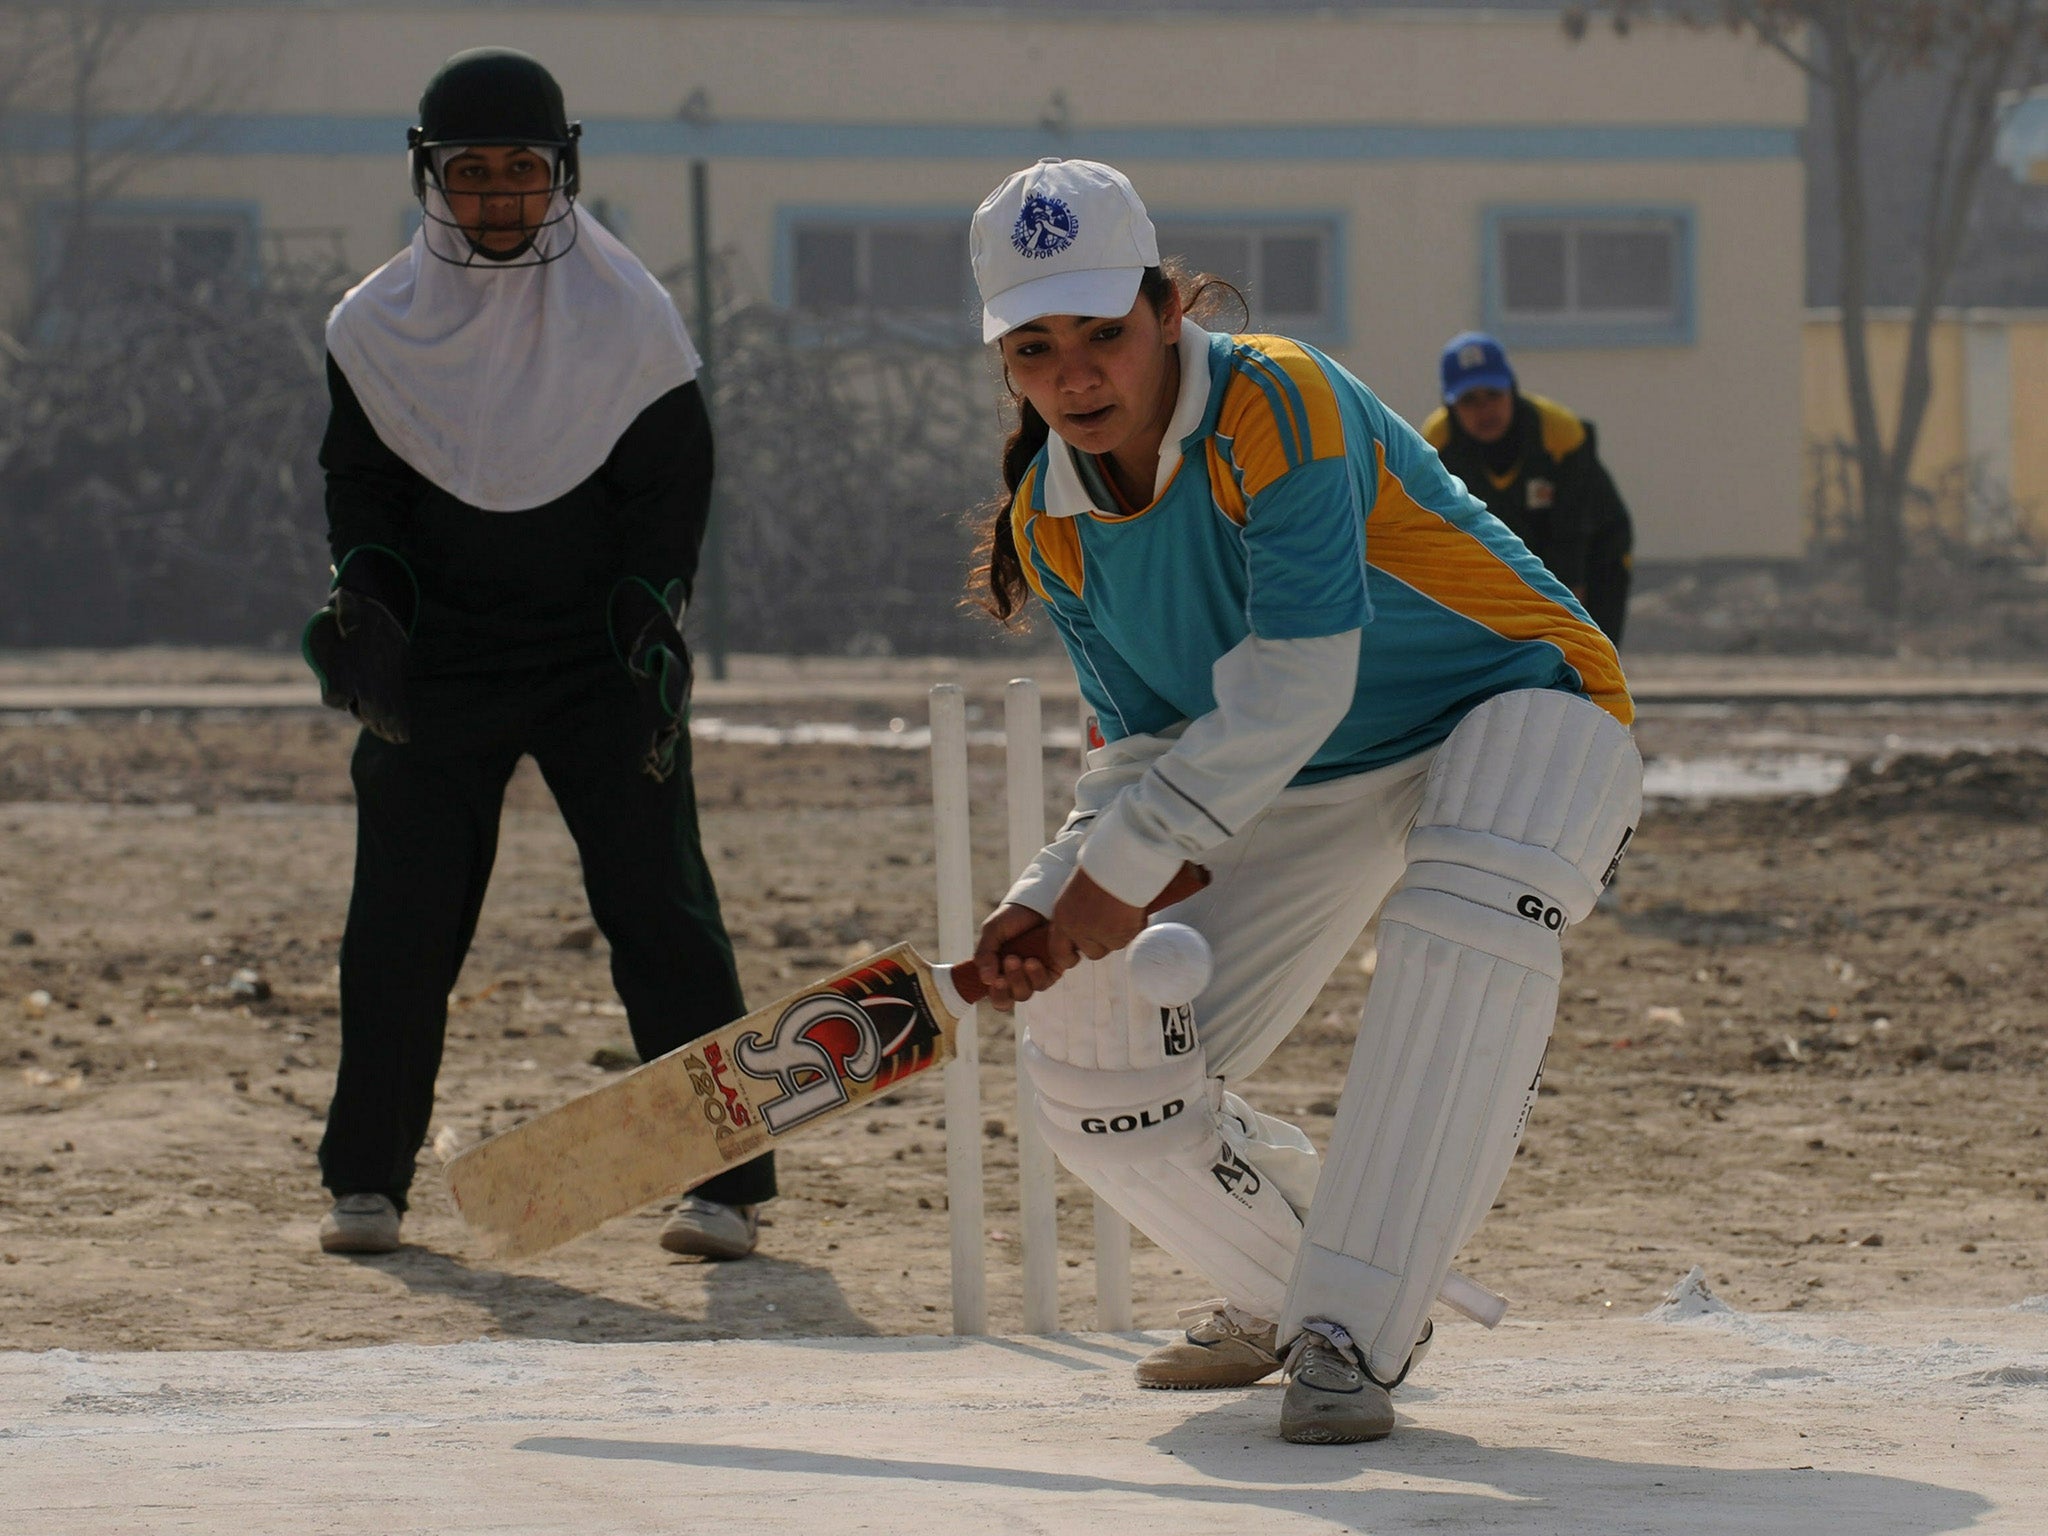 Afghan girls play cricket on the school grounds in Kabul